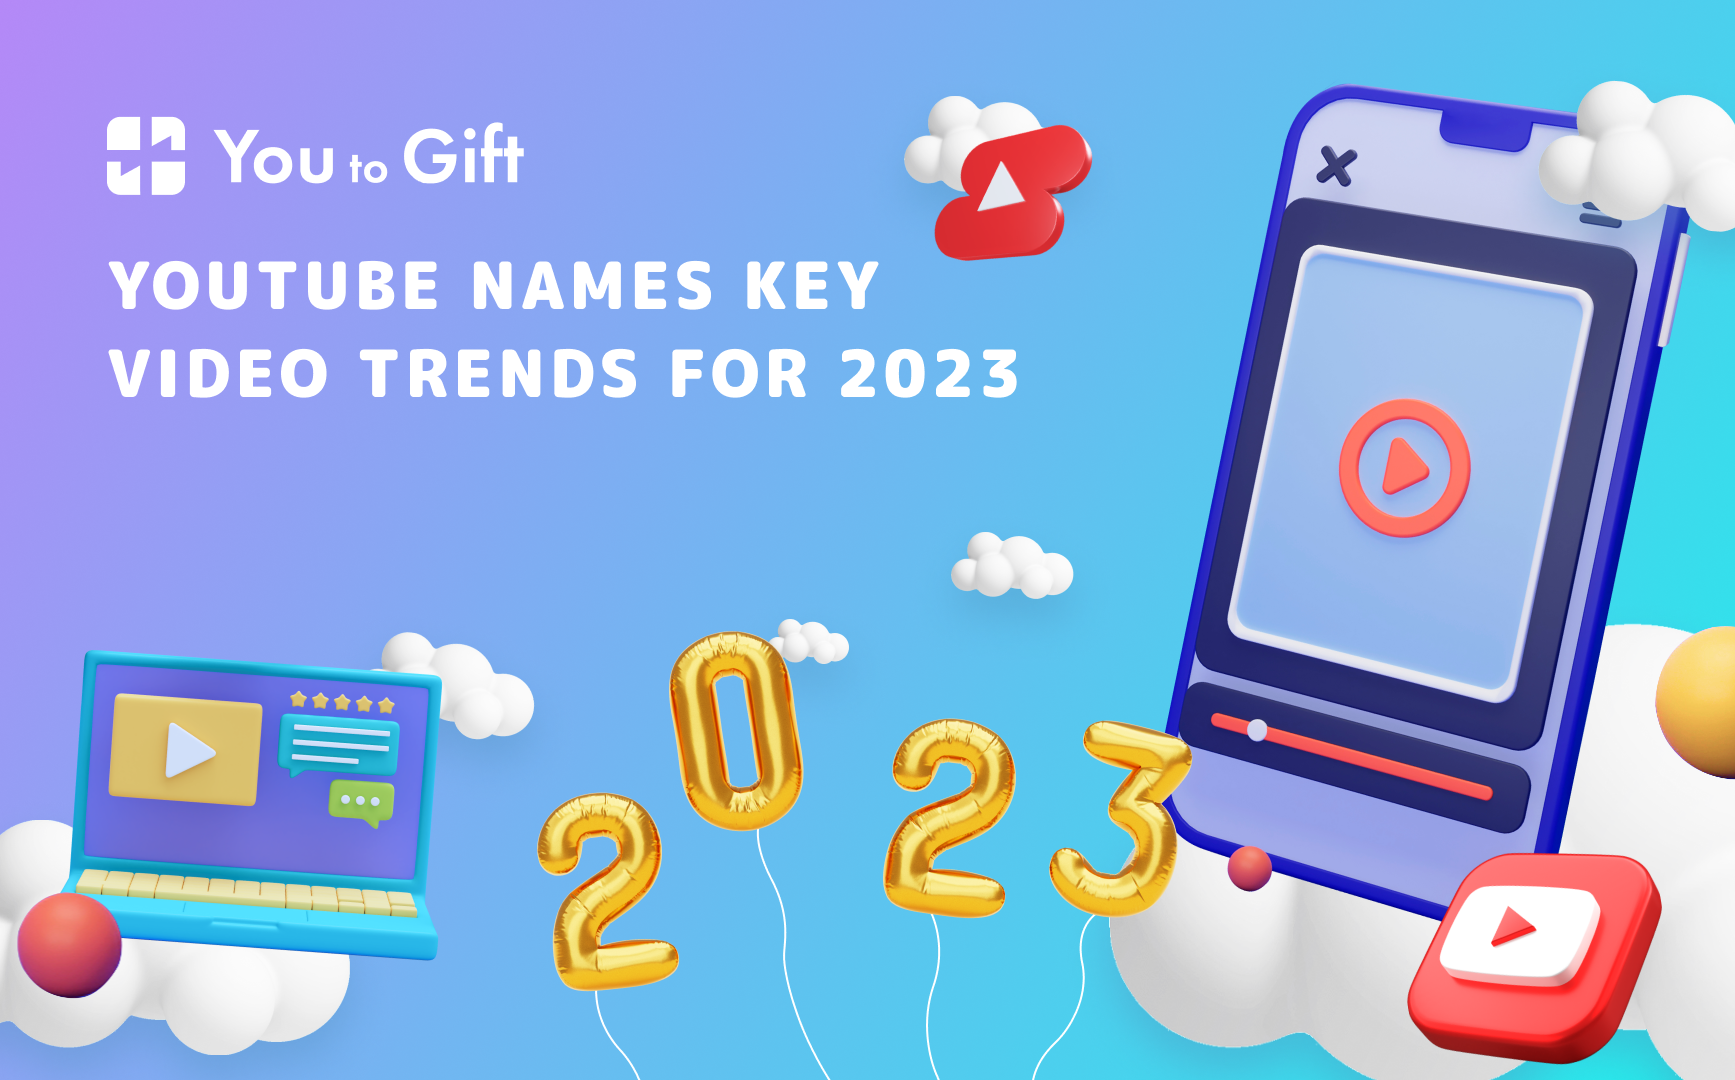 YouTube Names Key Video Trends for 2023